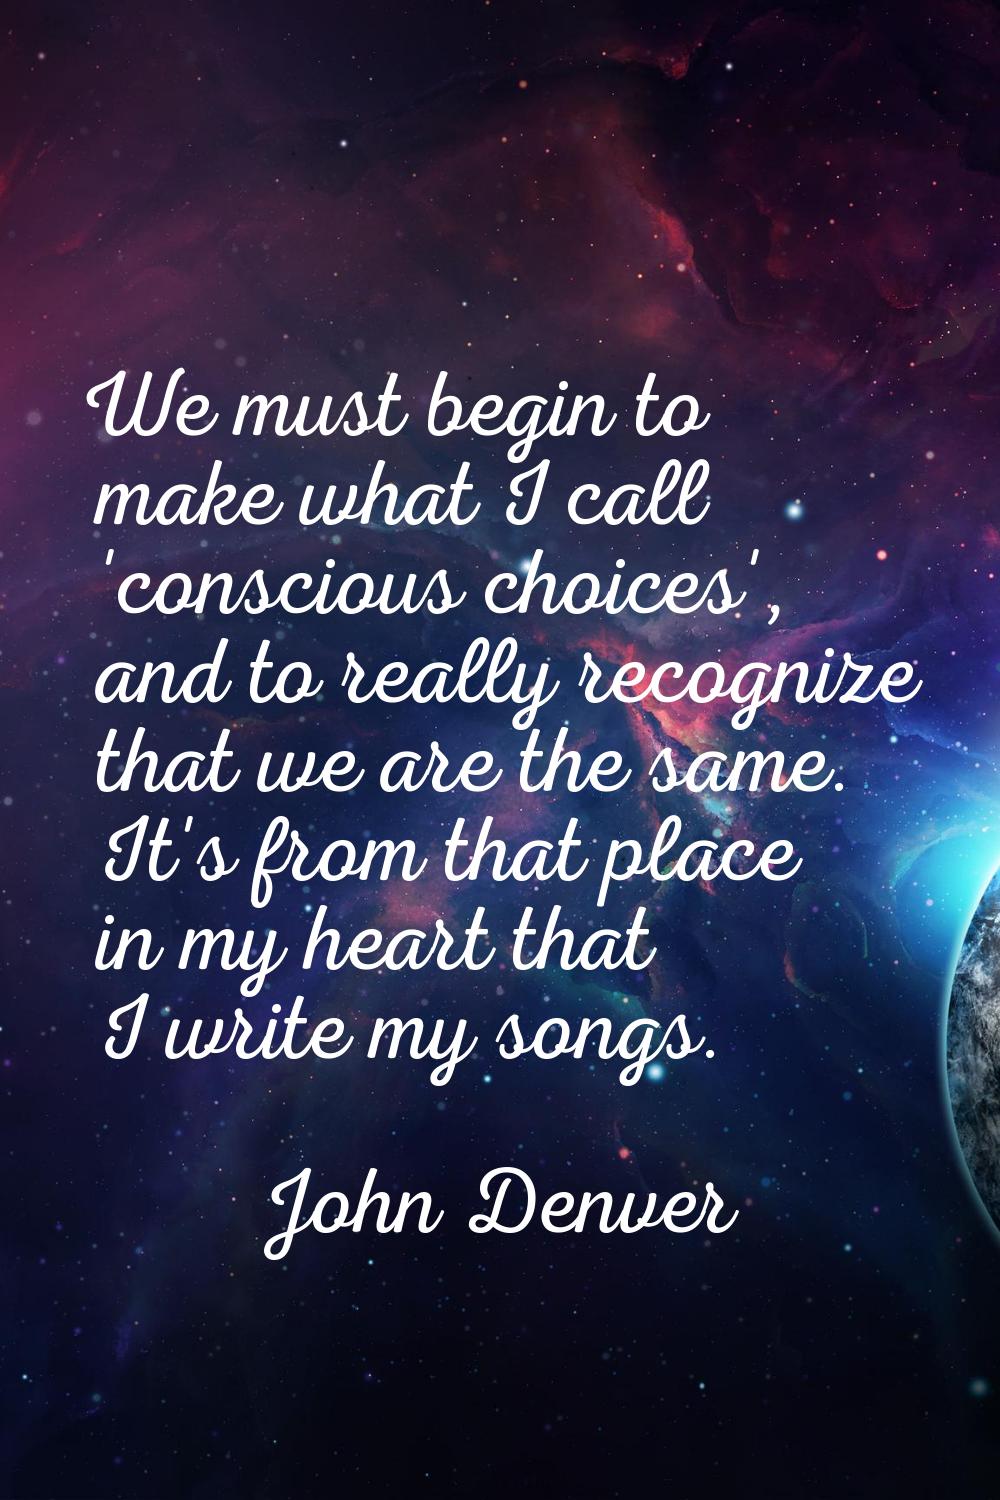 We must begin to make what I call 'conscious choices', and to really recognize that we are the same